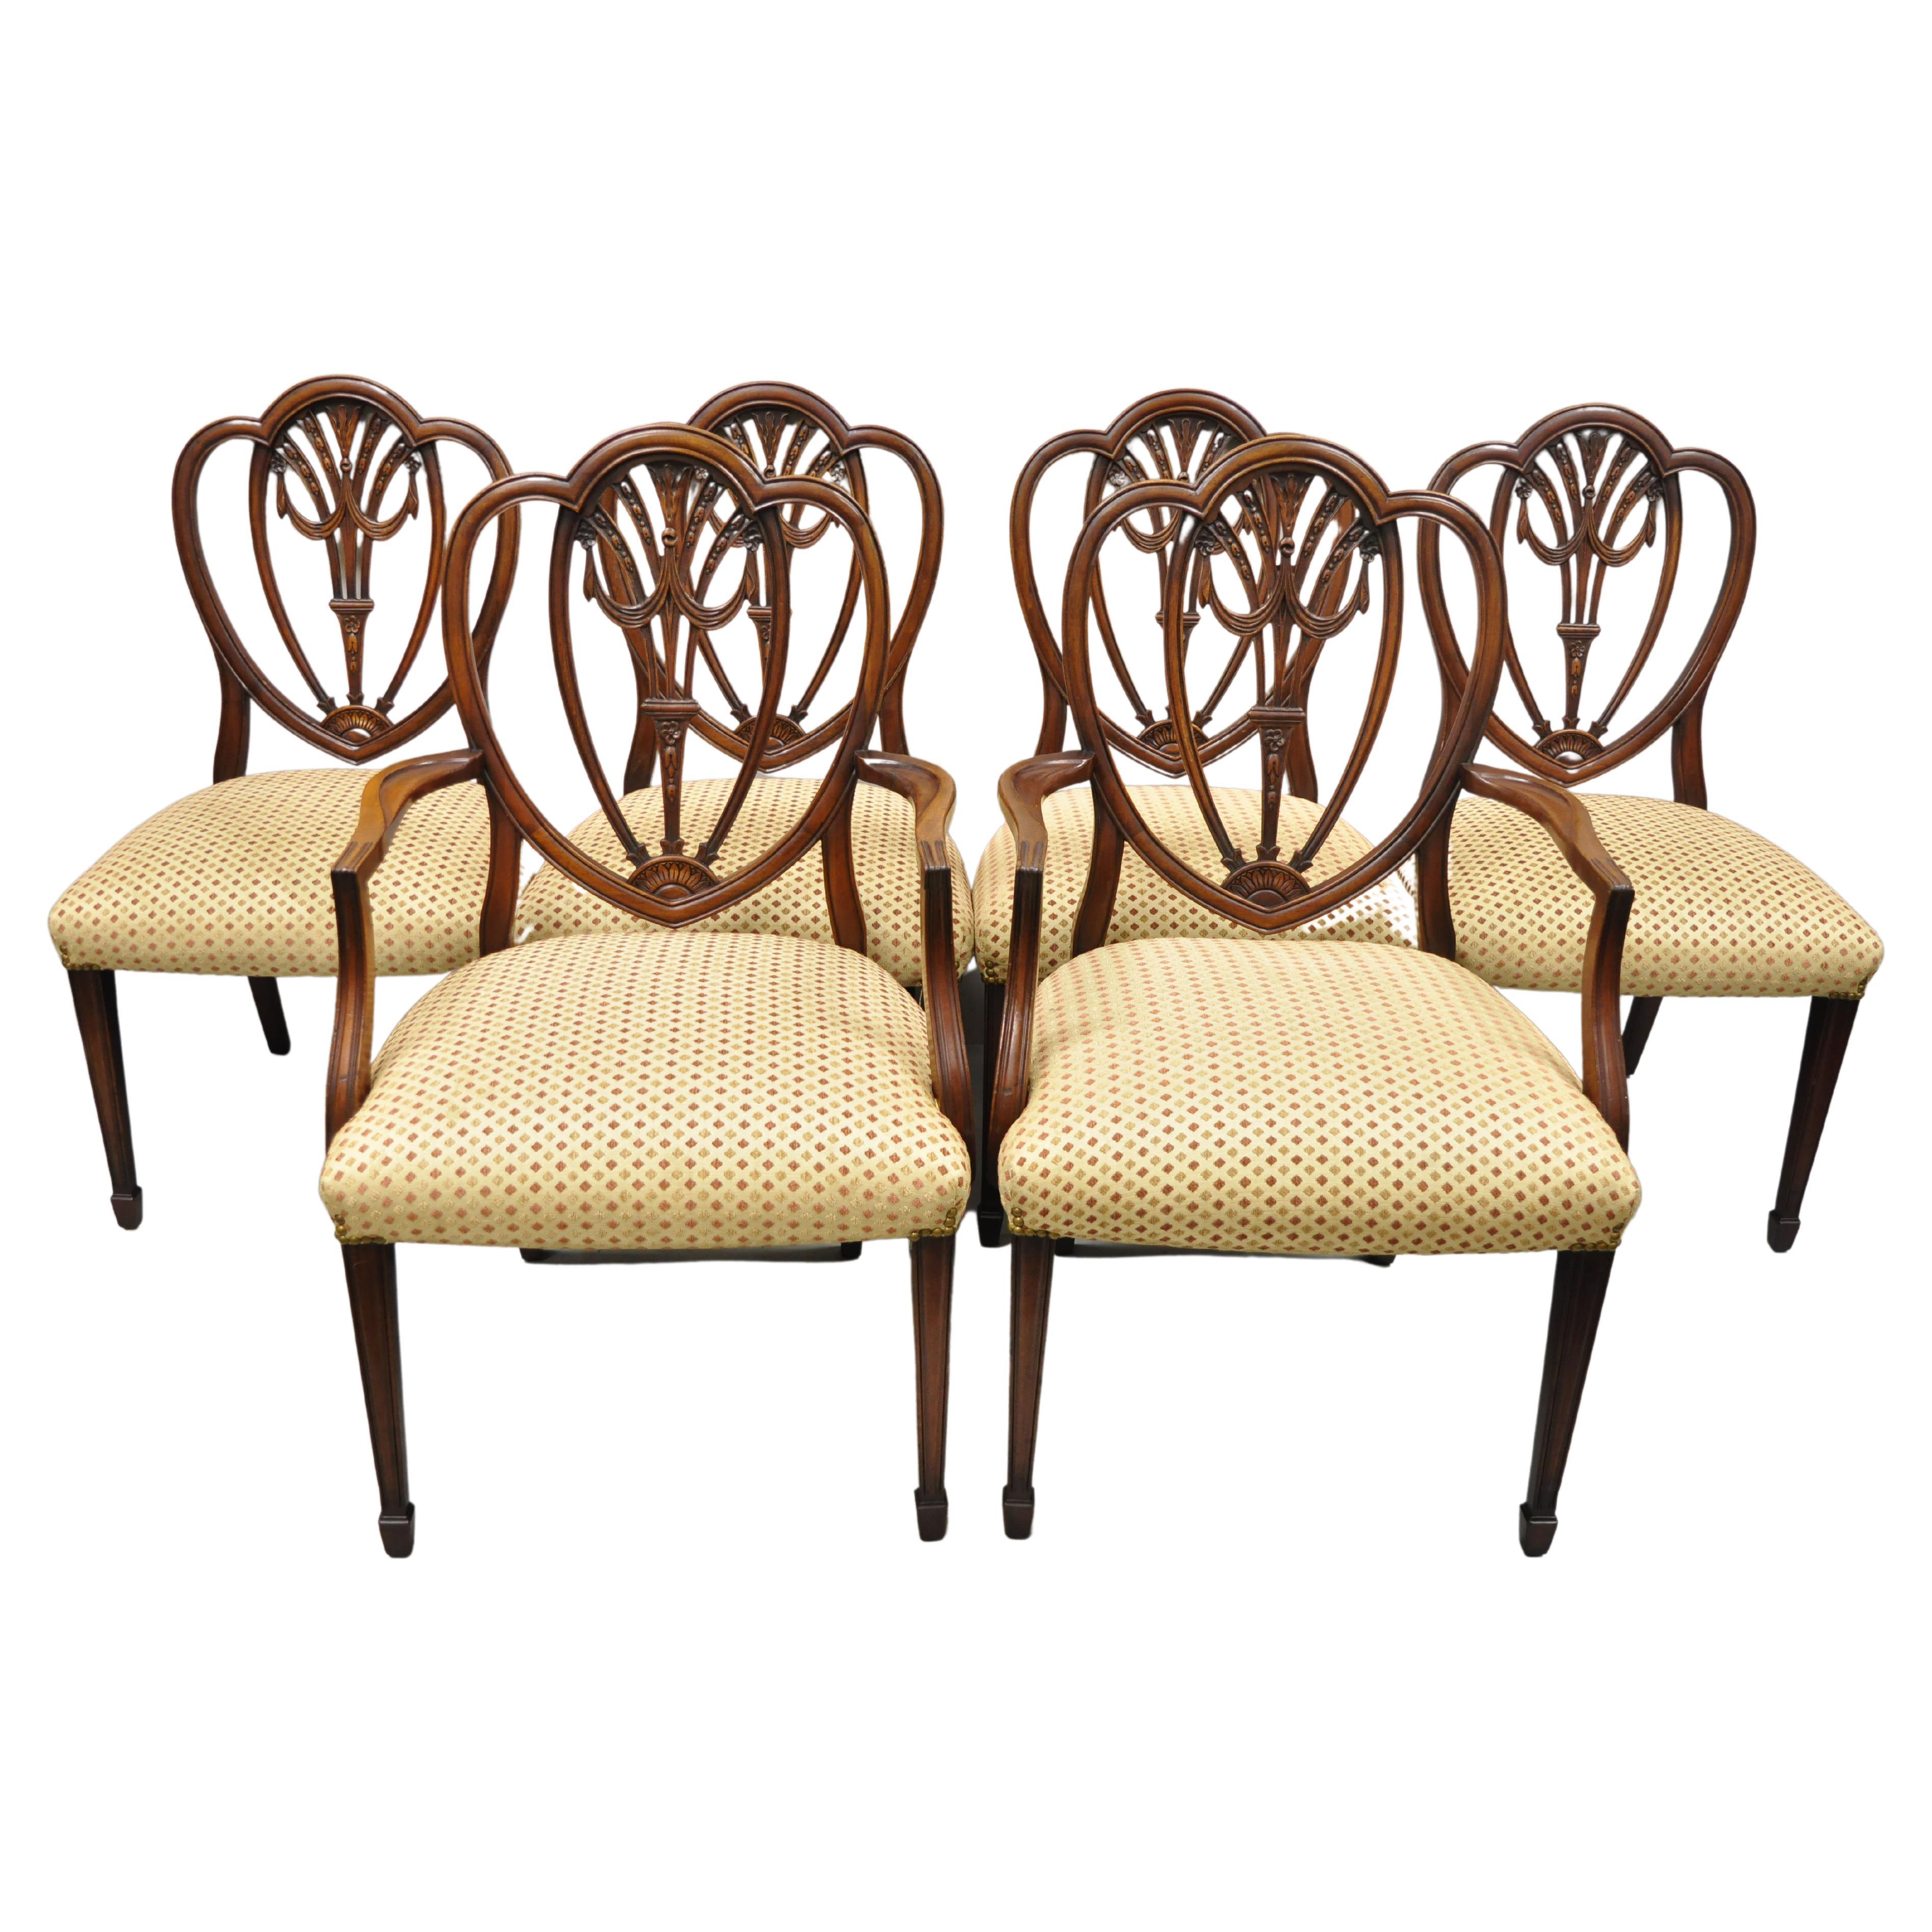 Antique Mahogany Hepplewhite Carved Drape Heart Back Dining Chairs, Set of 6